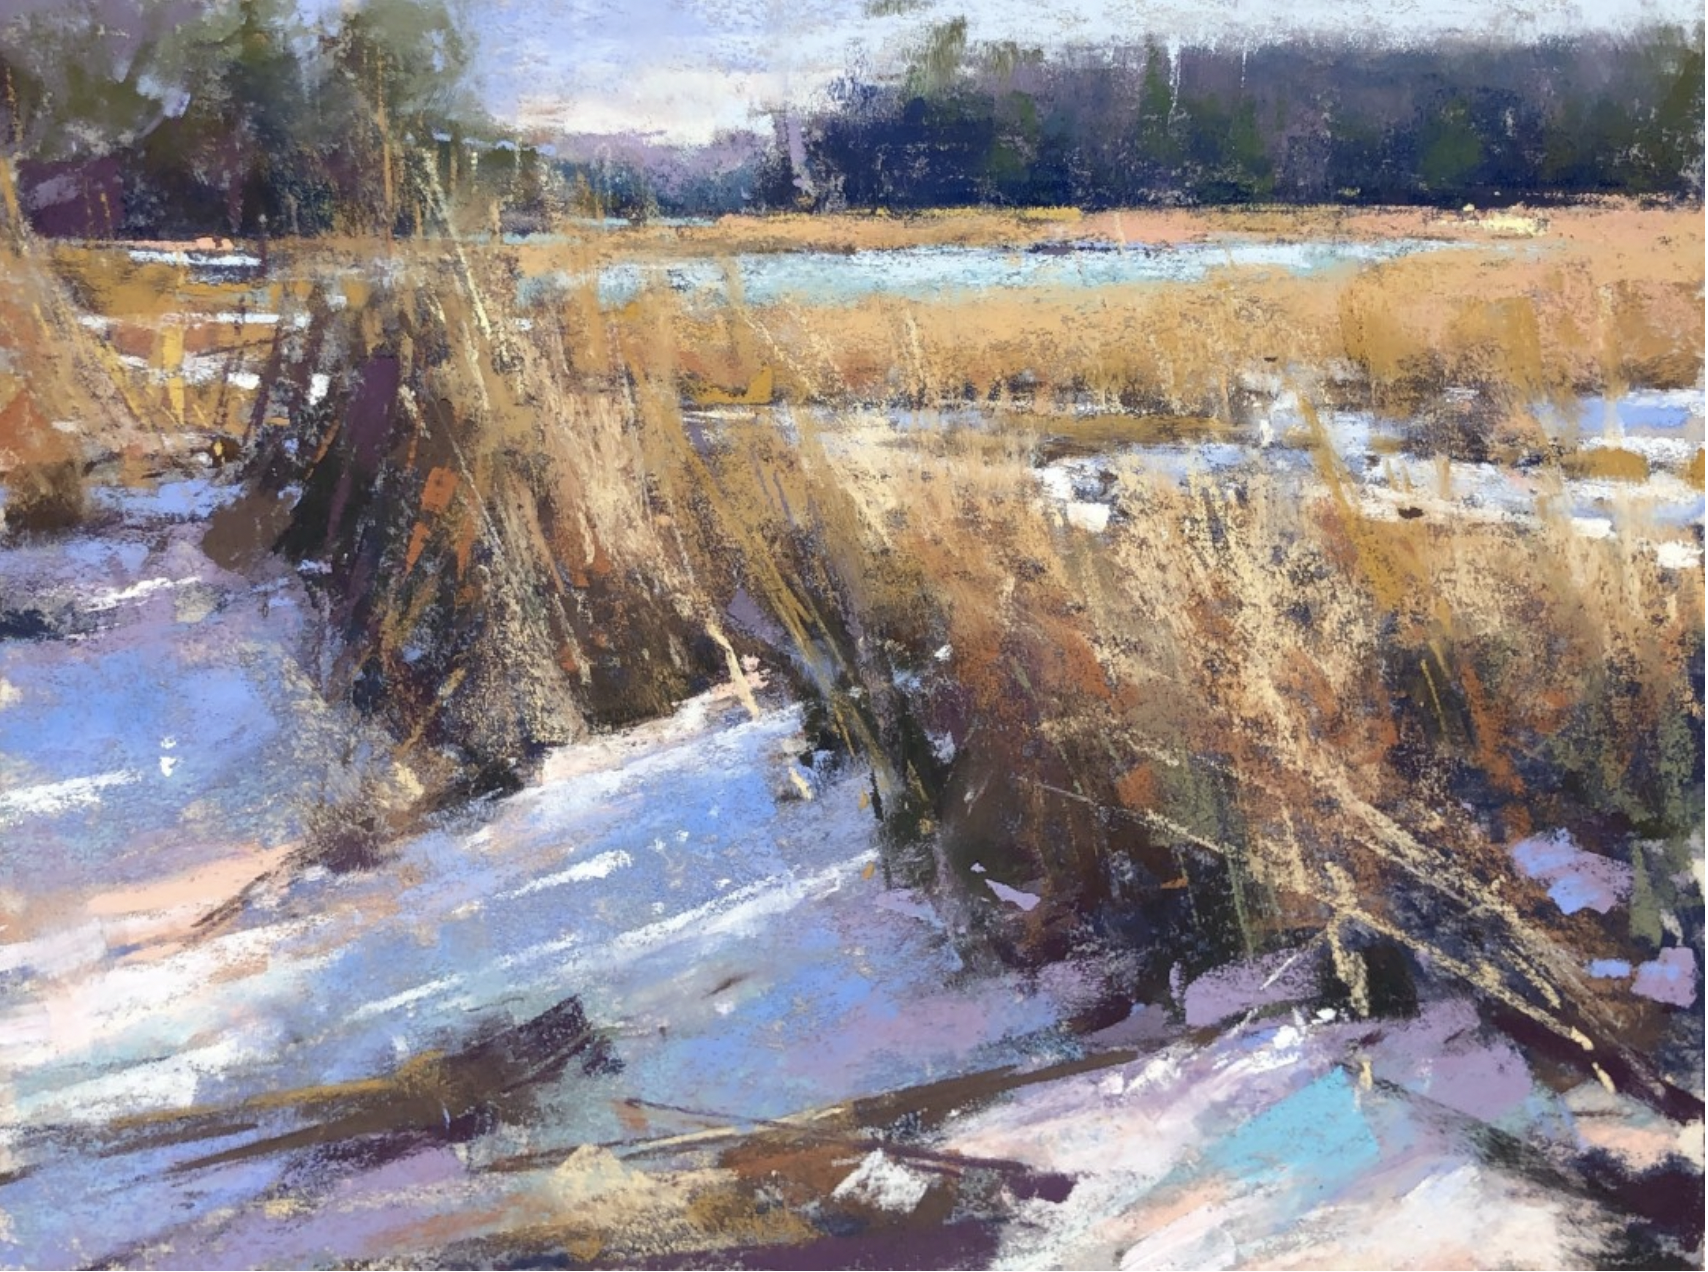 third quarter winners-Jacob Aguiar, "March in Scarborough Marsh, "pastels on UART paper, 6 x 8 in.